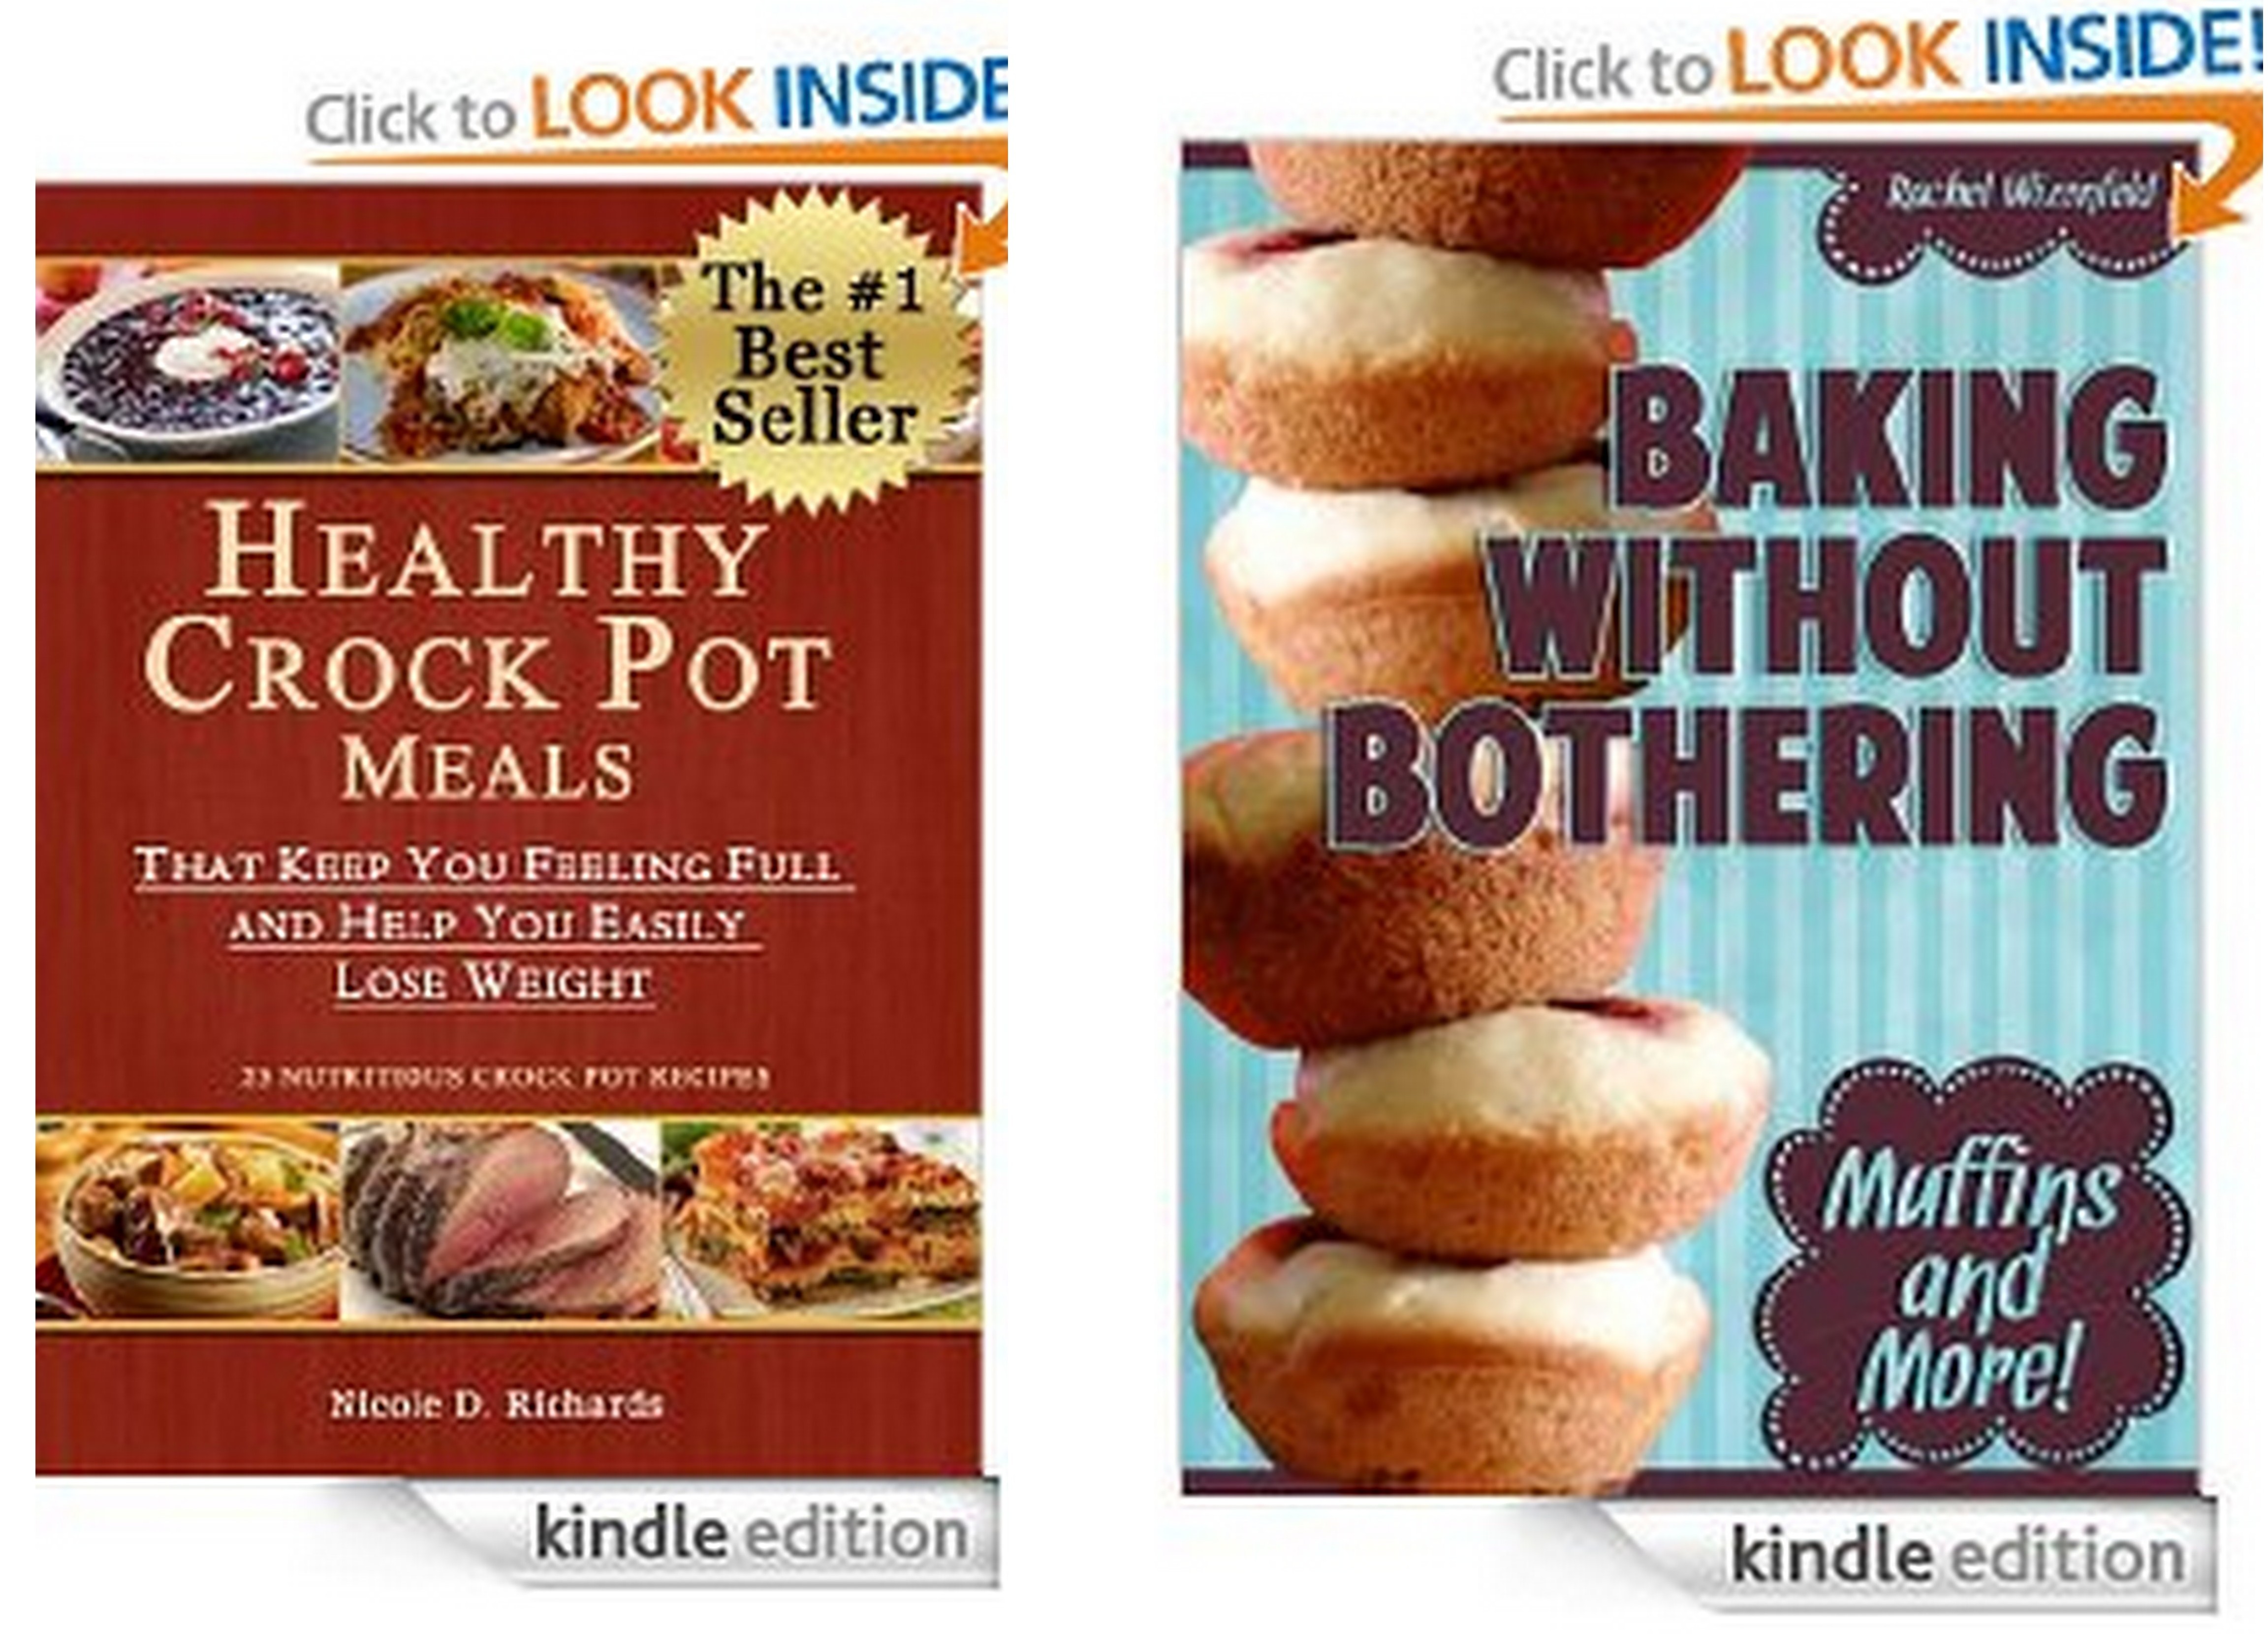 Free Kindle Books | Healthy Crock Post Meals and Baking Without Bothering